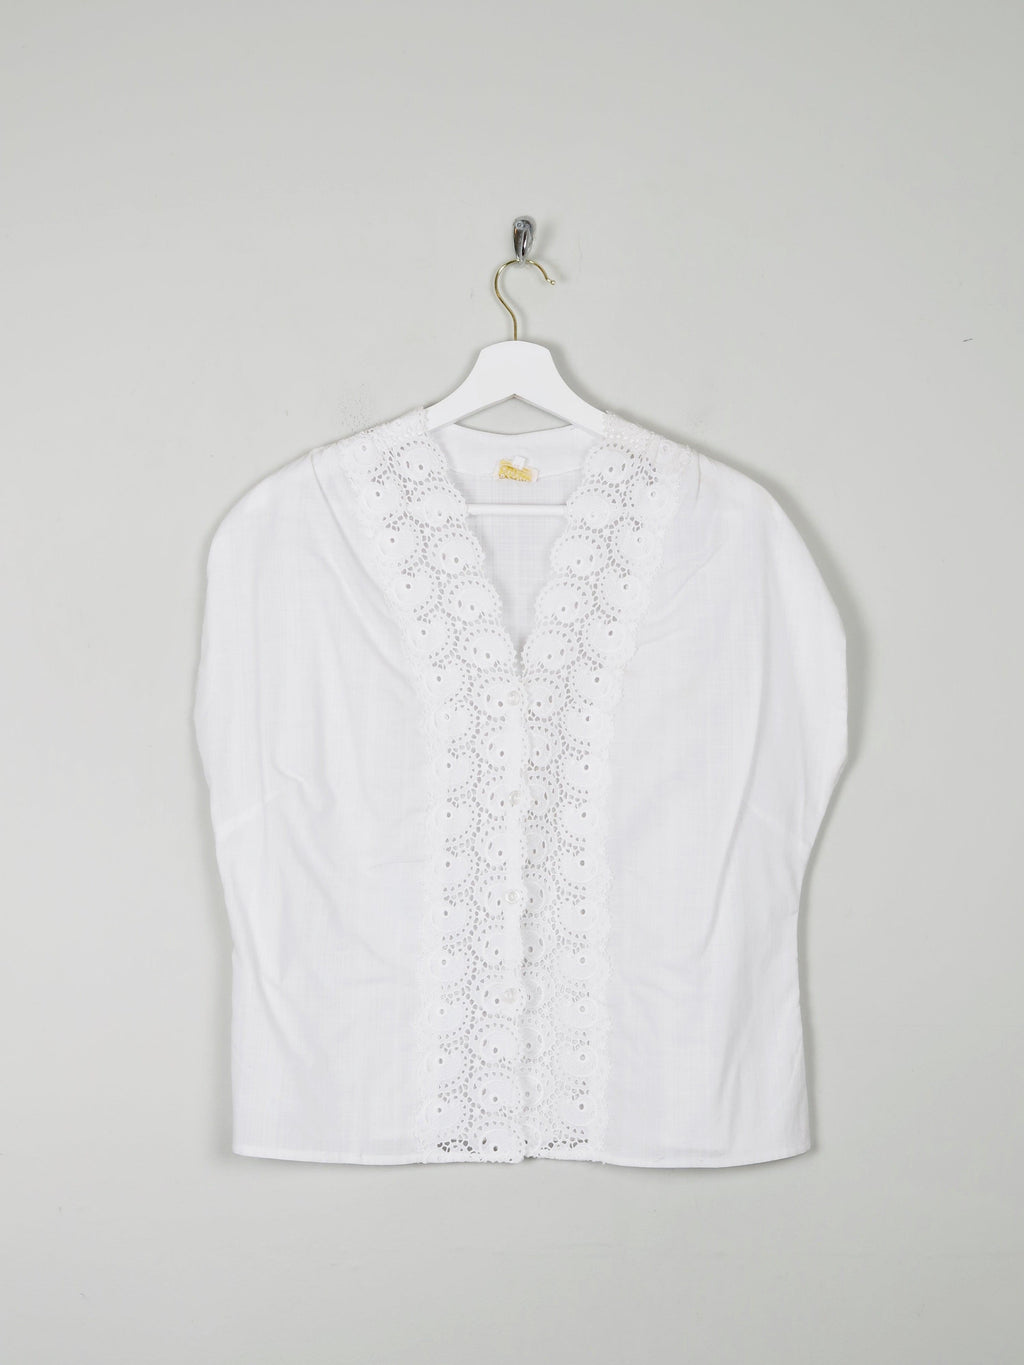 Women's 1950s Blouse With Lace Panel M - The Harlequin